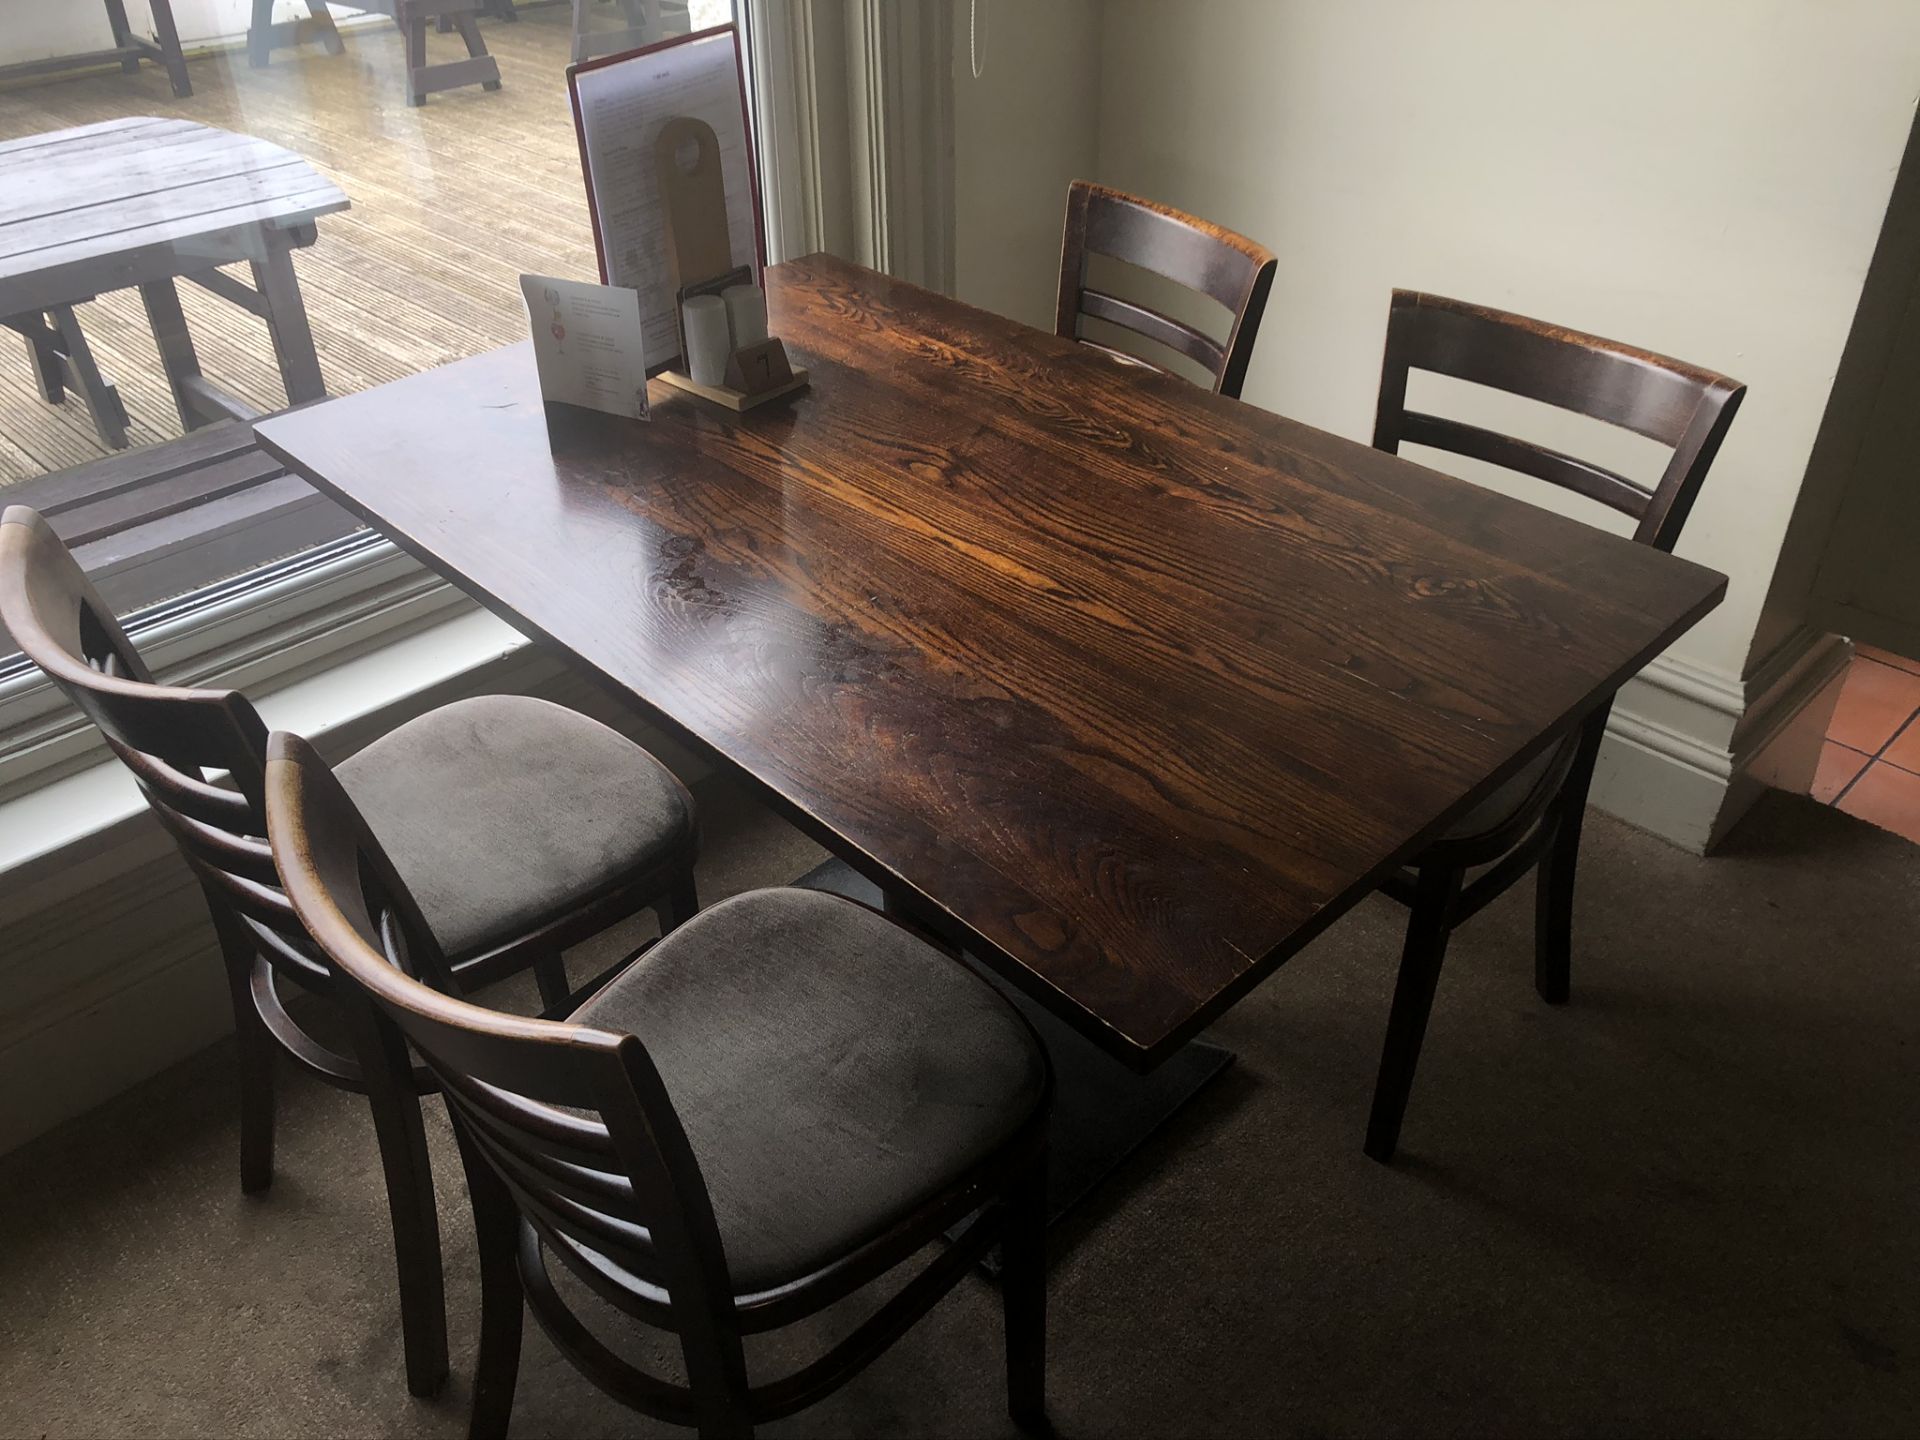 10 x Wooden Dining Tables - Image 7 of 10